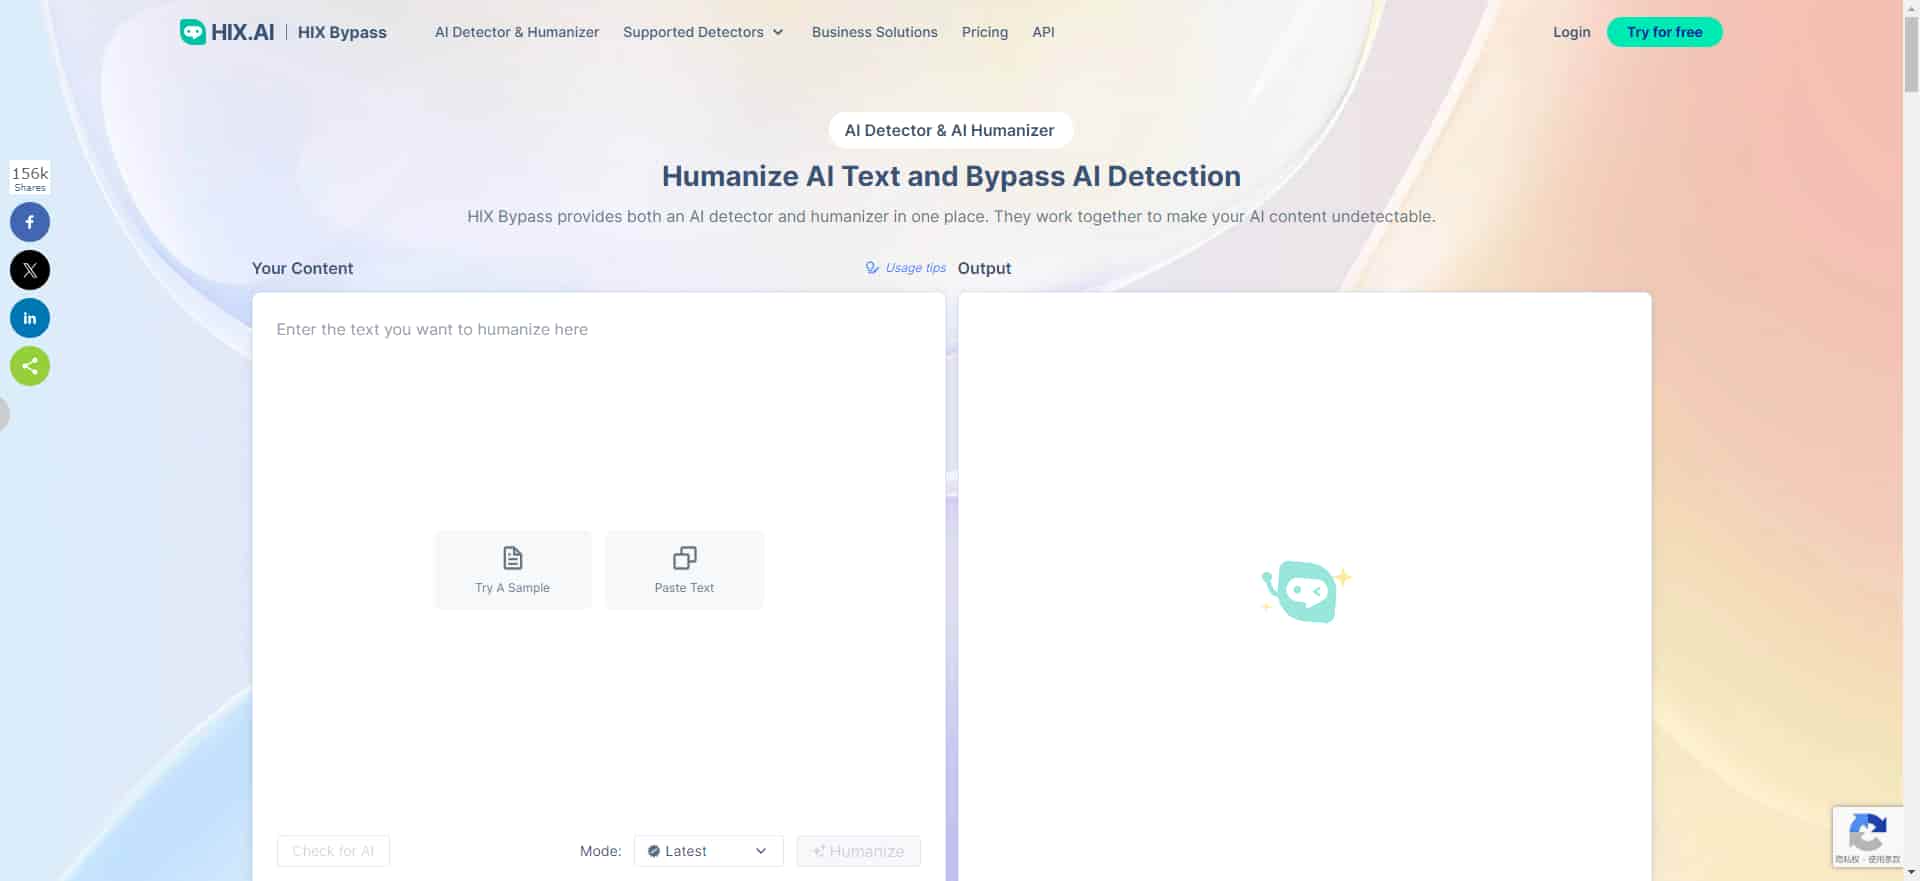 HIX Bypass - Discover how HIX Bypass helps you create undetectable AI-generated content that bypasses AI detectors and plagiarism checks.